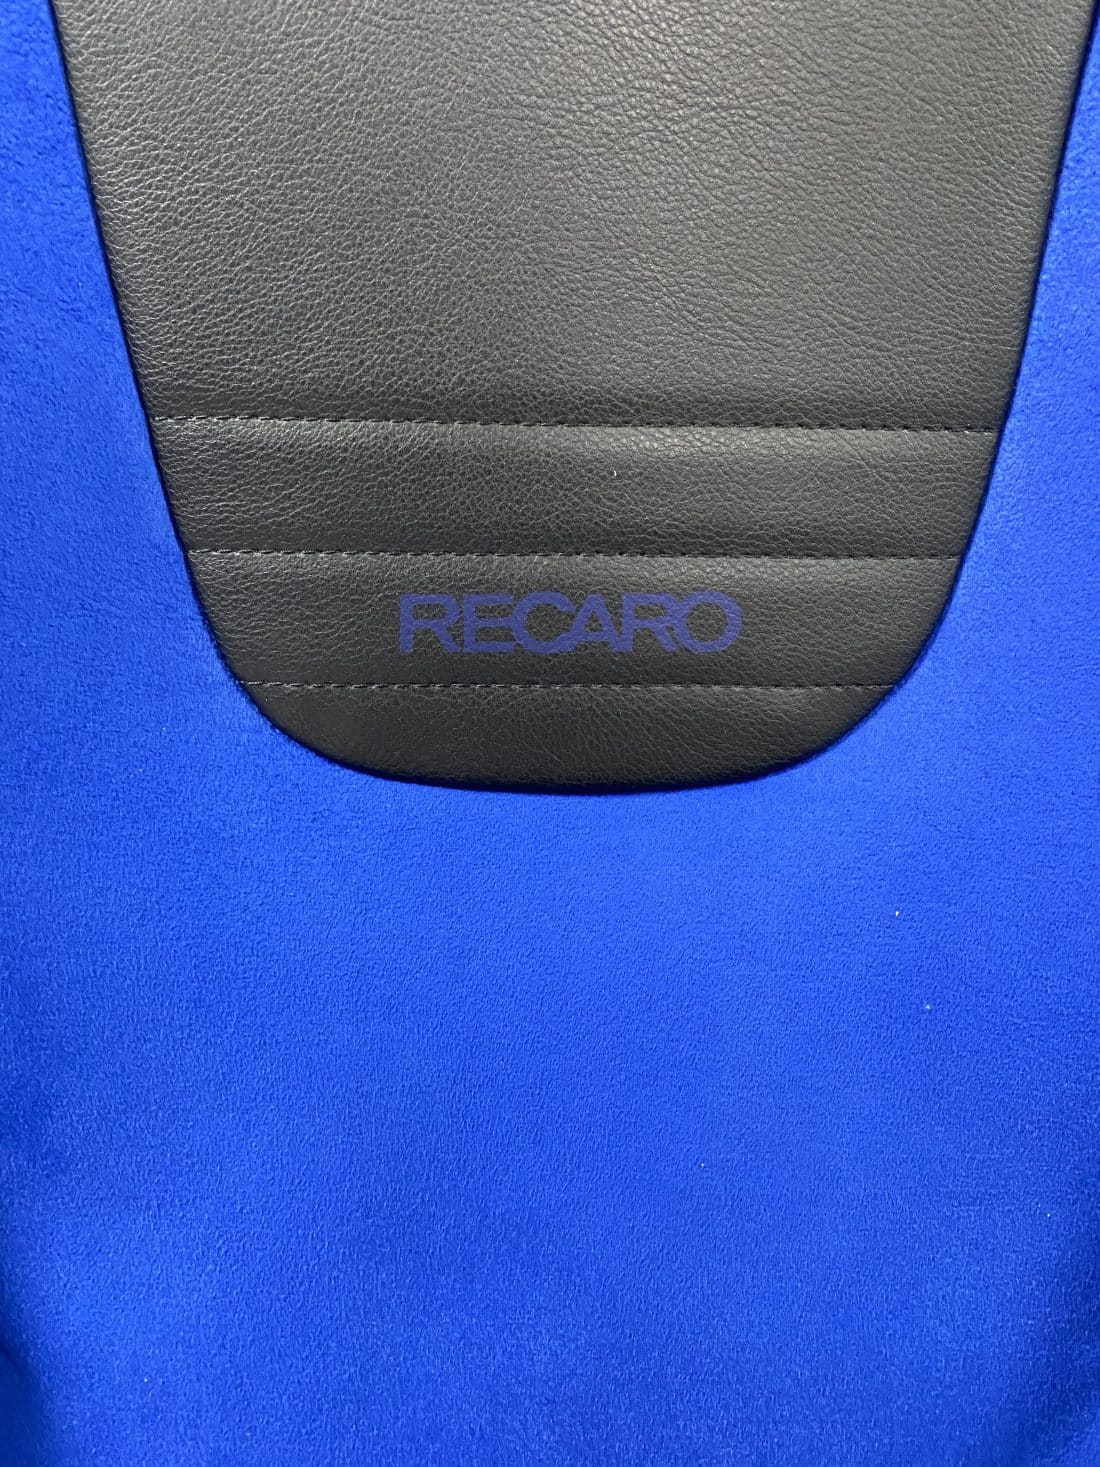 Trp Post Container Data Trp Post Id 12251 Recaro Sport Trendline Dinamica Blue Artificial Leather Black Trp Post Container